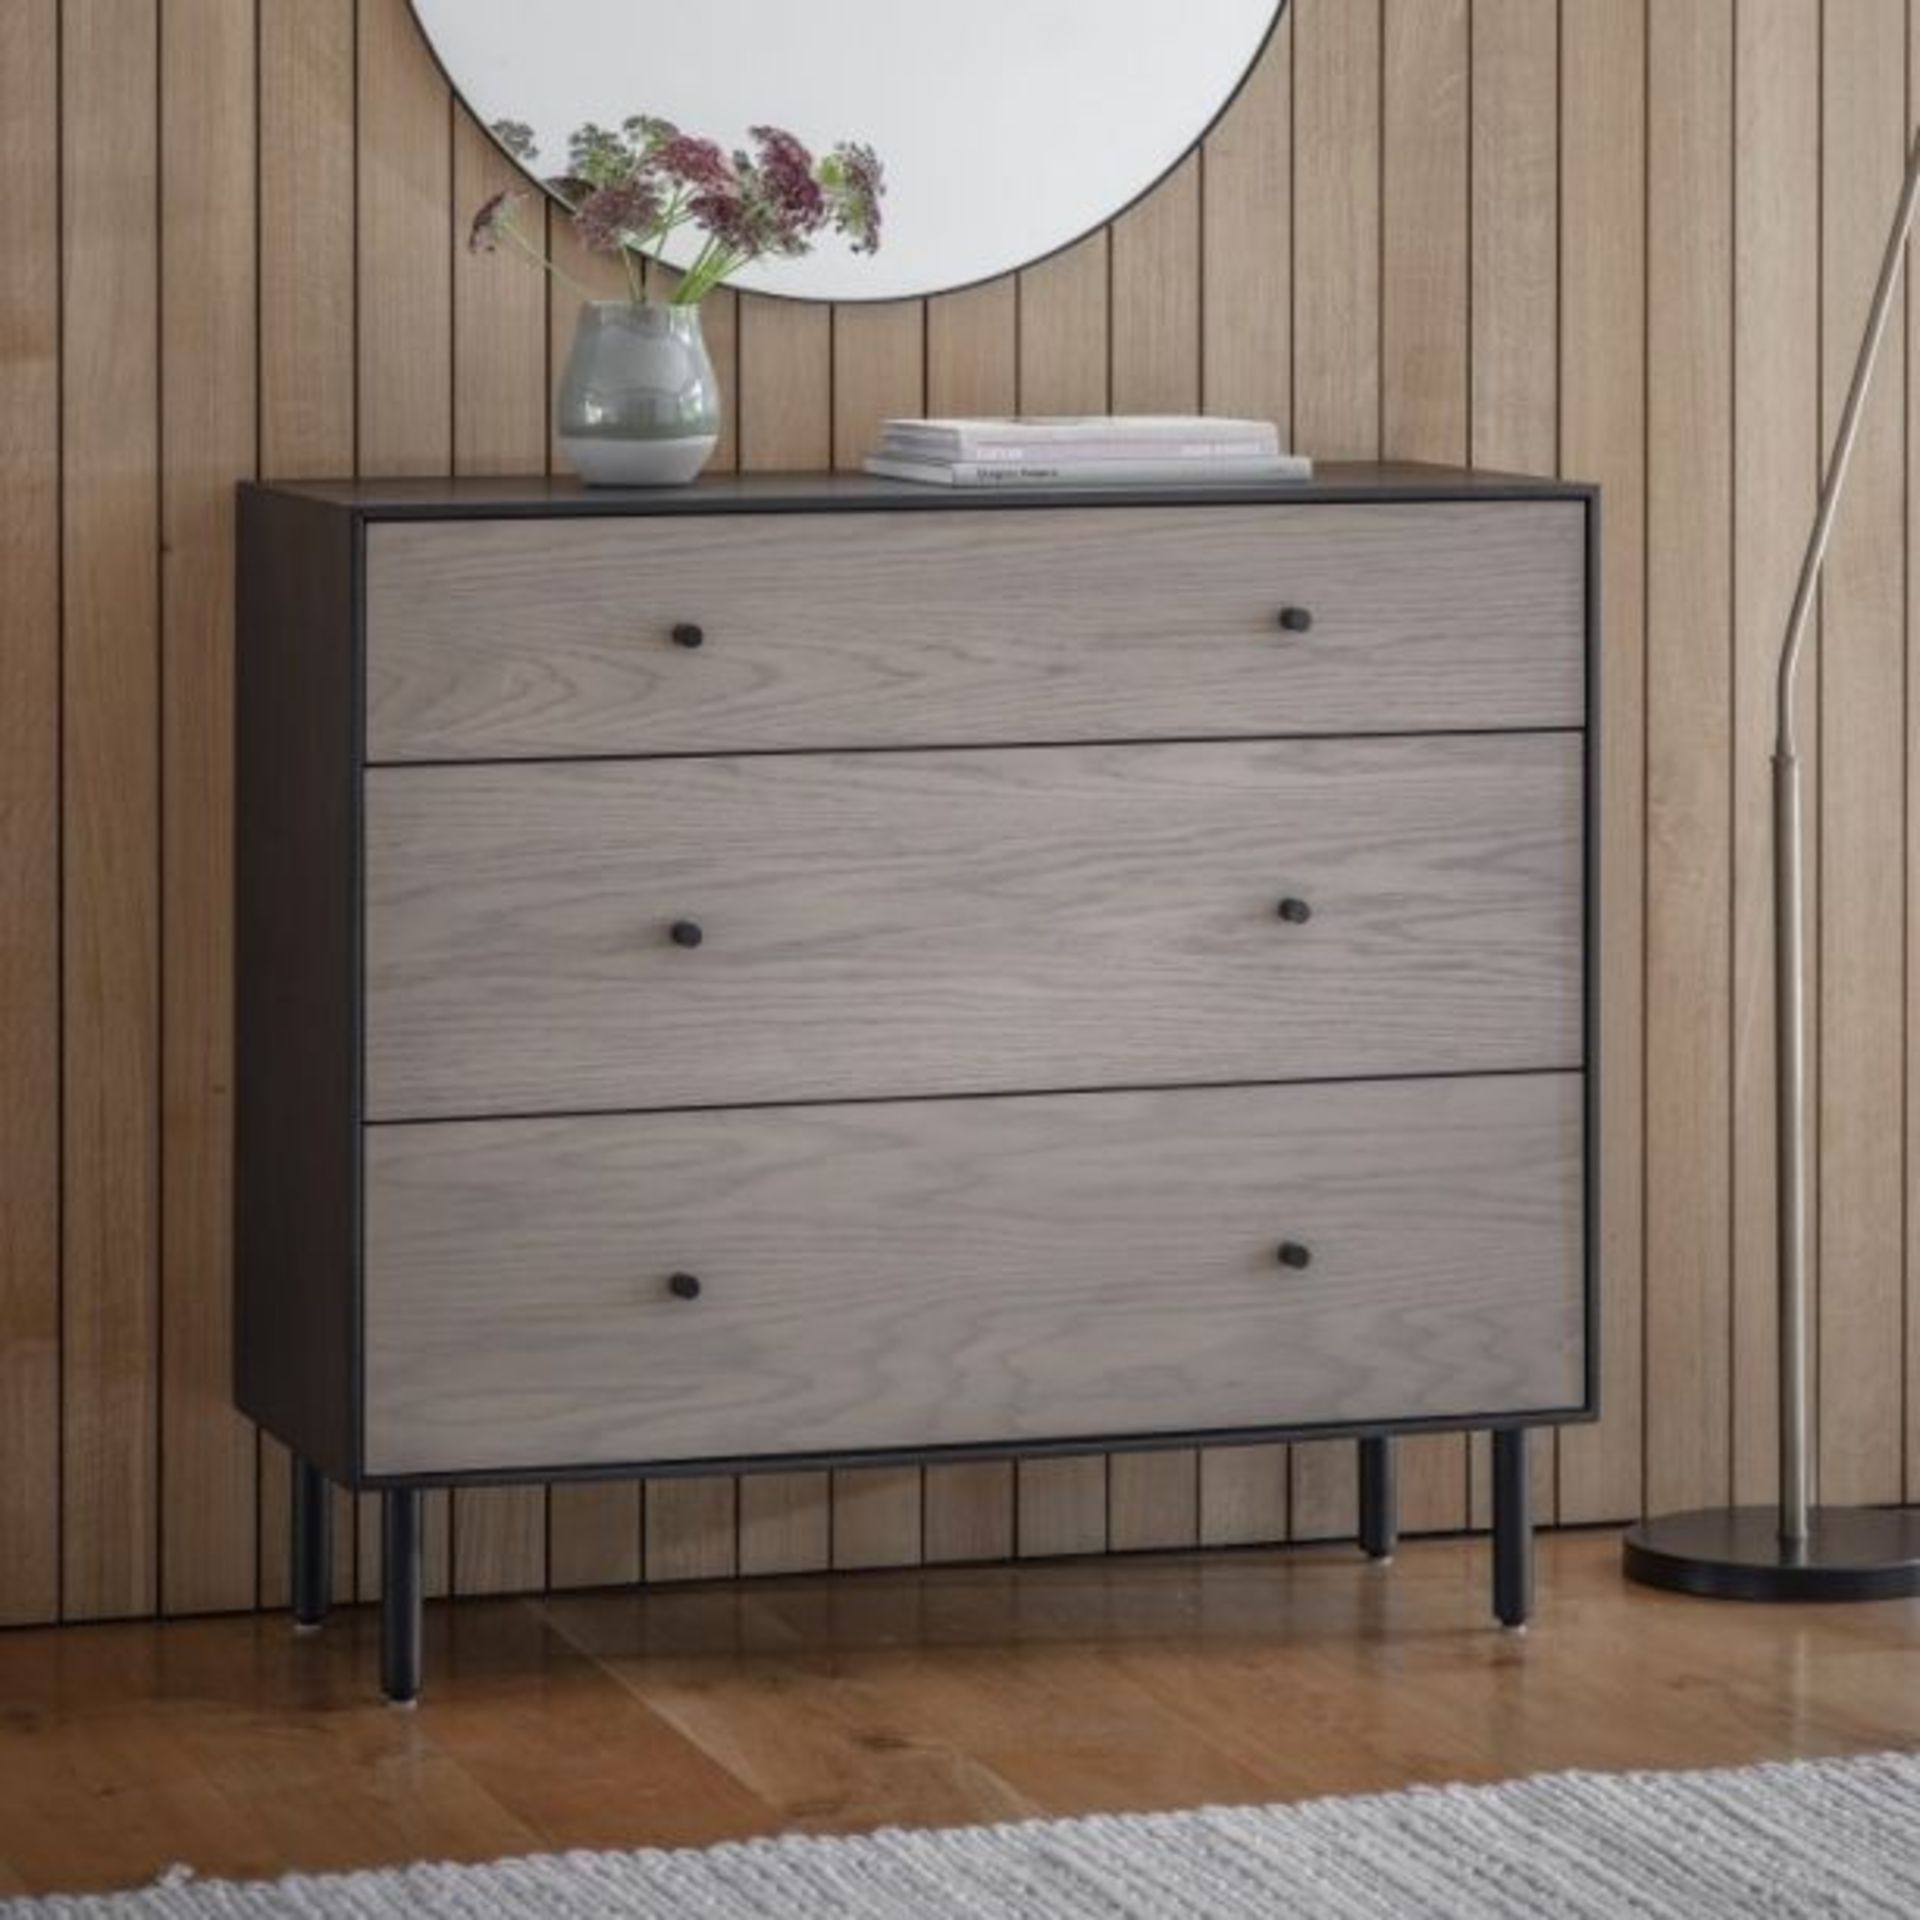 Carbury 3 Drawer Chest 1000x420x900mm Stylish Collection Of Oak Veneer Furniture Perfect For